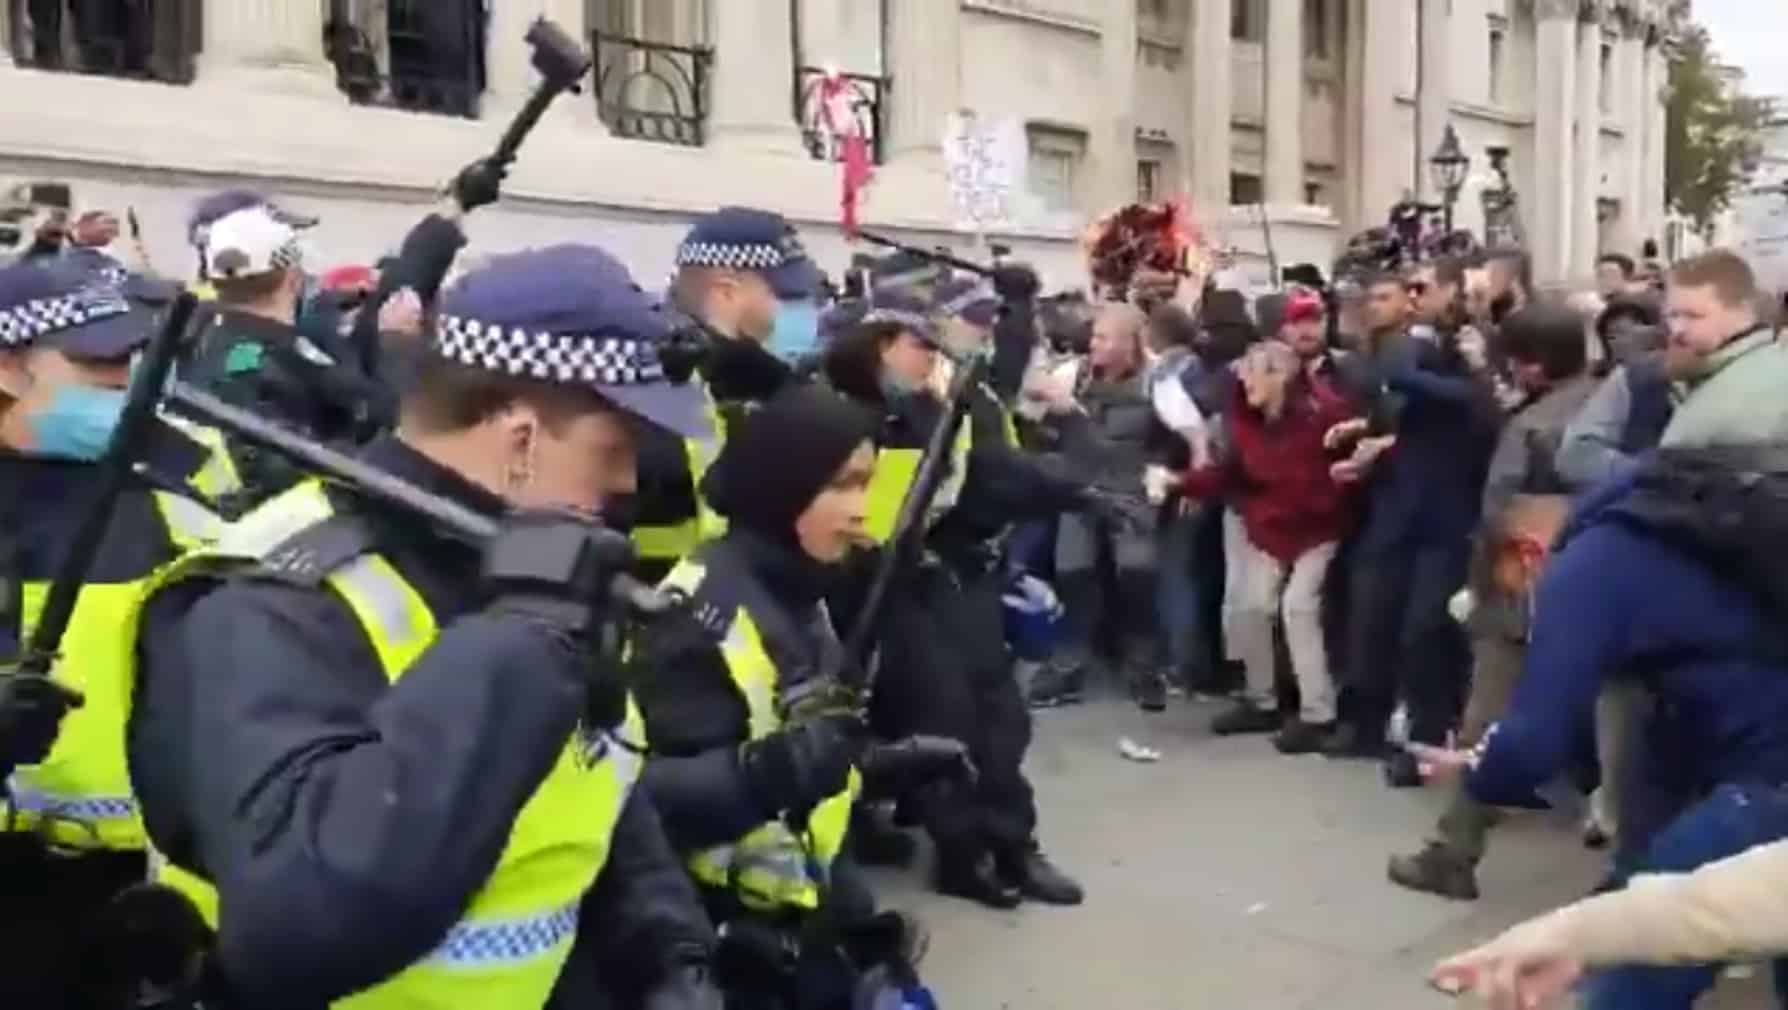 Video of female Muslim police officer leading the line at anti-lockdown protest goes viral